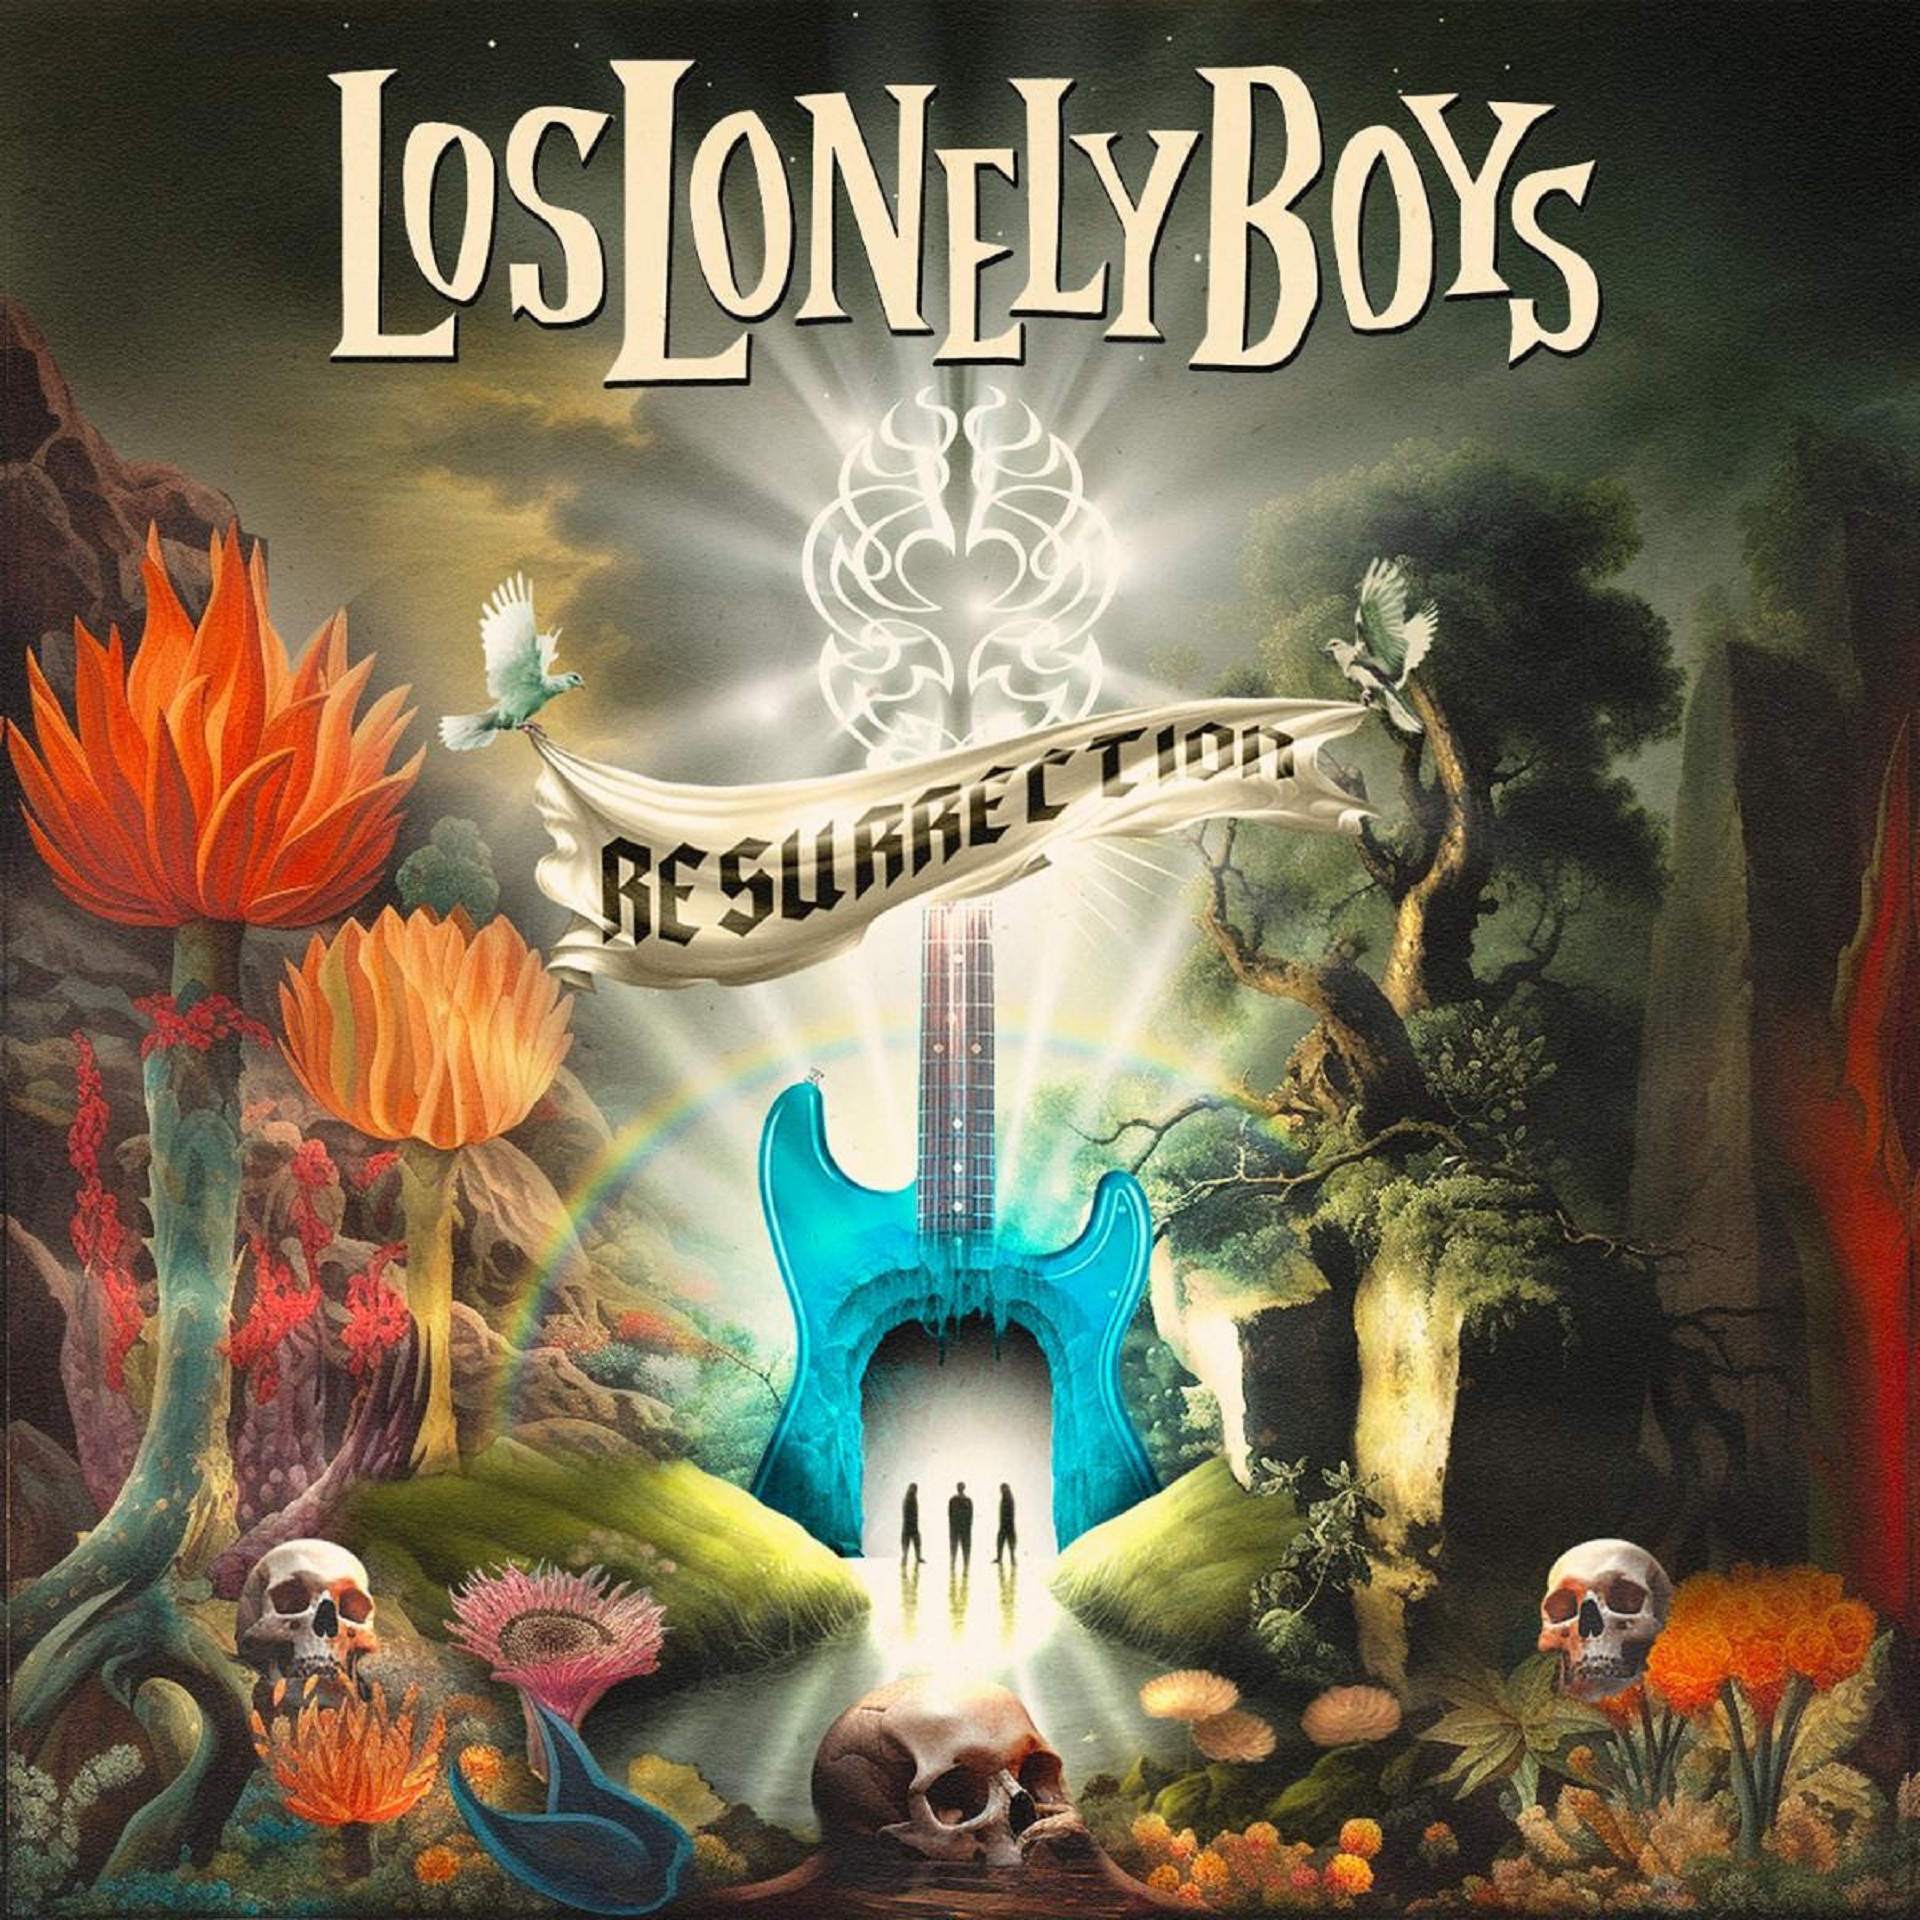 Los Lonely Boys Debut New Single From First Album in 11 Years